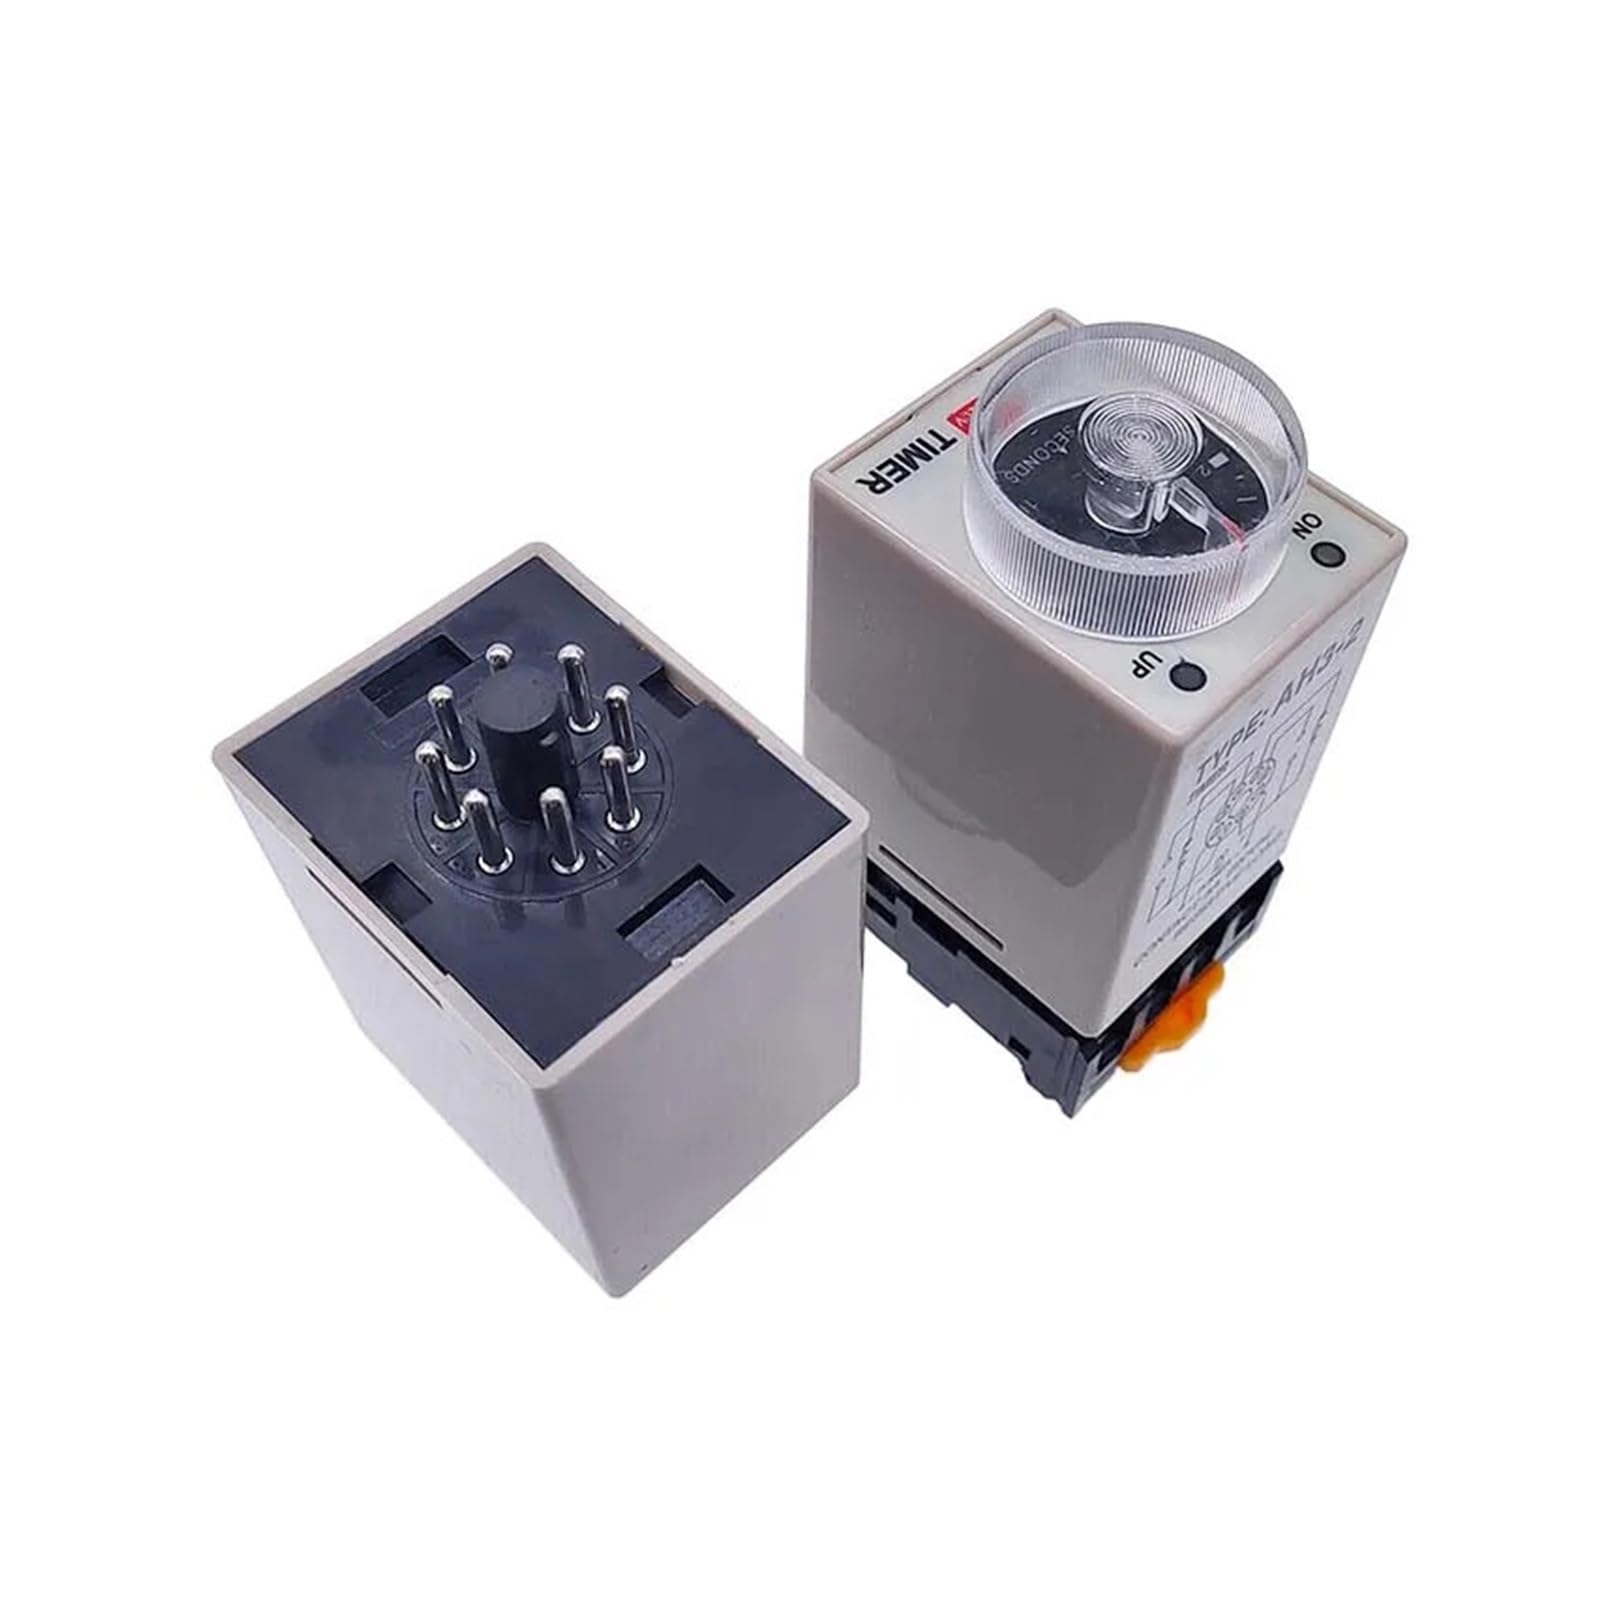 1 PC AH3-2 Power-on Delay Timer AH3-3 Time Relay AC Thick Stitch Time Set Range 1S/5S/10S/30S/60S/5M/10M/30M NWPNLXEA(AC220V,AH3-2 0-10Minutes) von NWPNLXEA